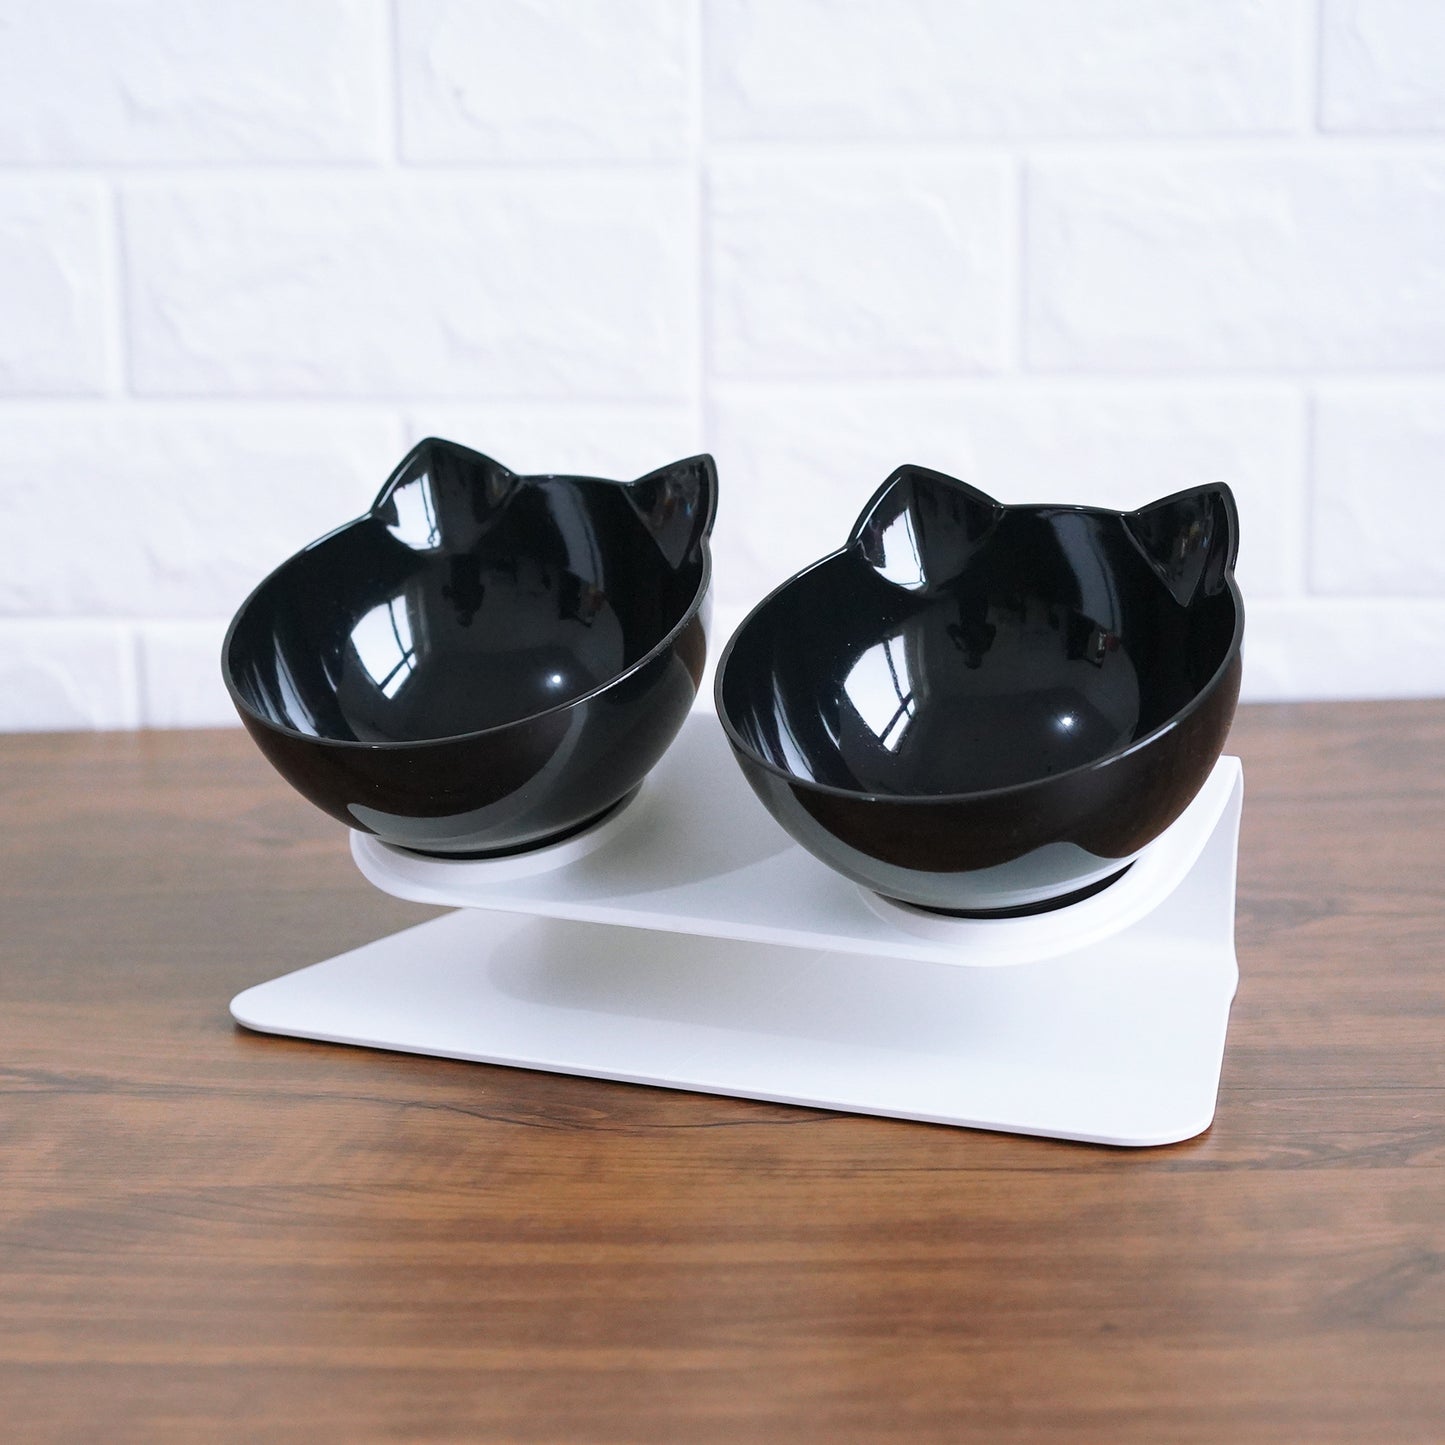 Bowls in the shape of a cat's head with an inclined bowl holder